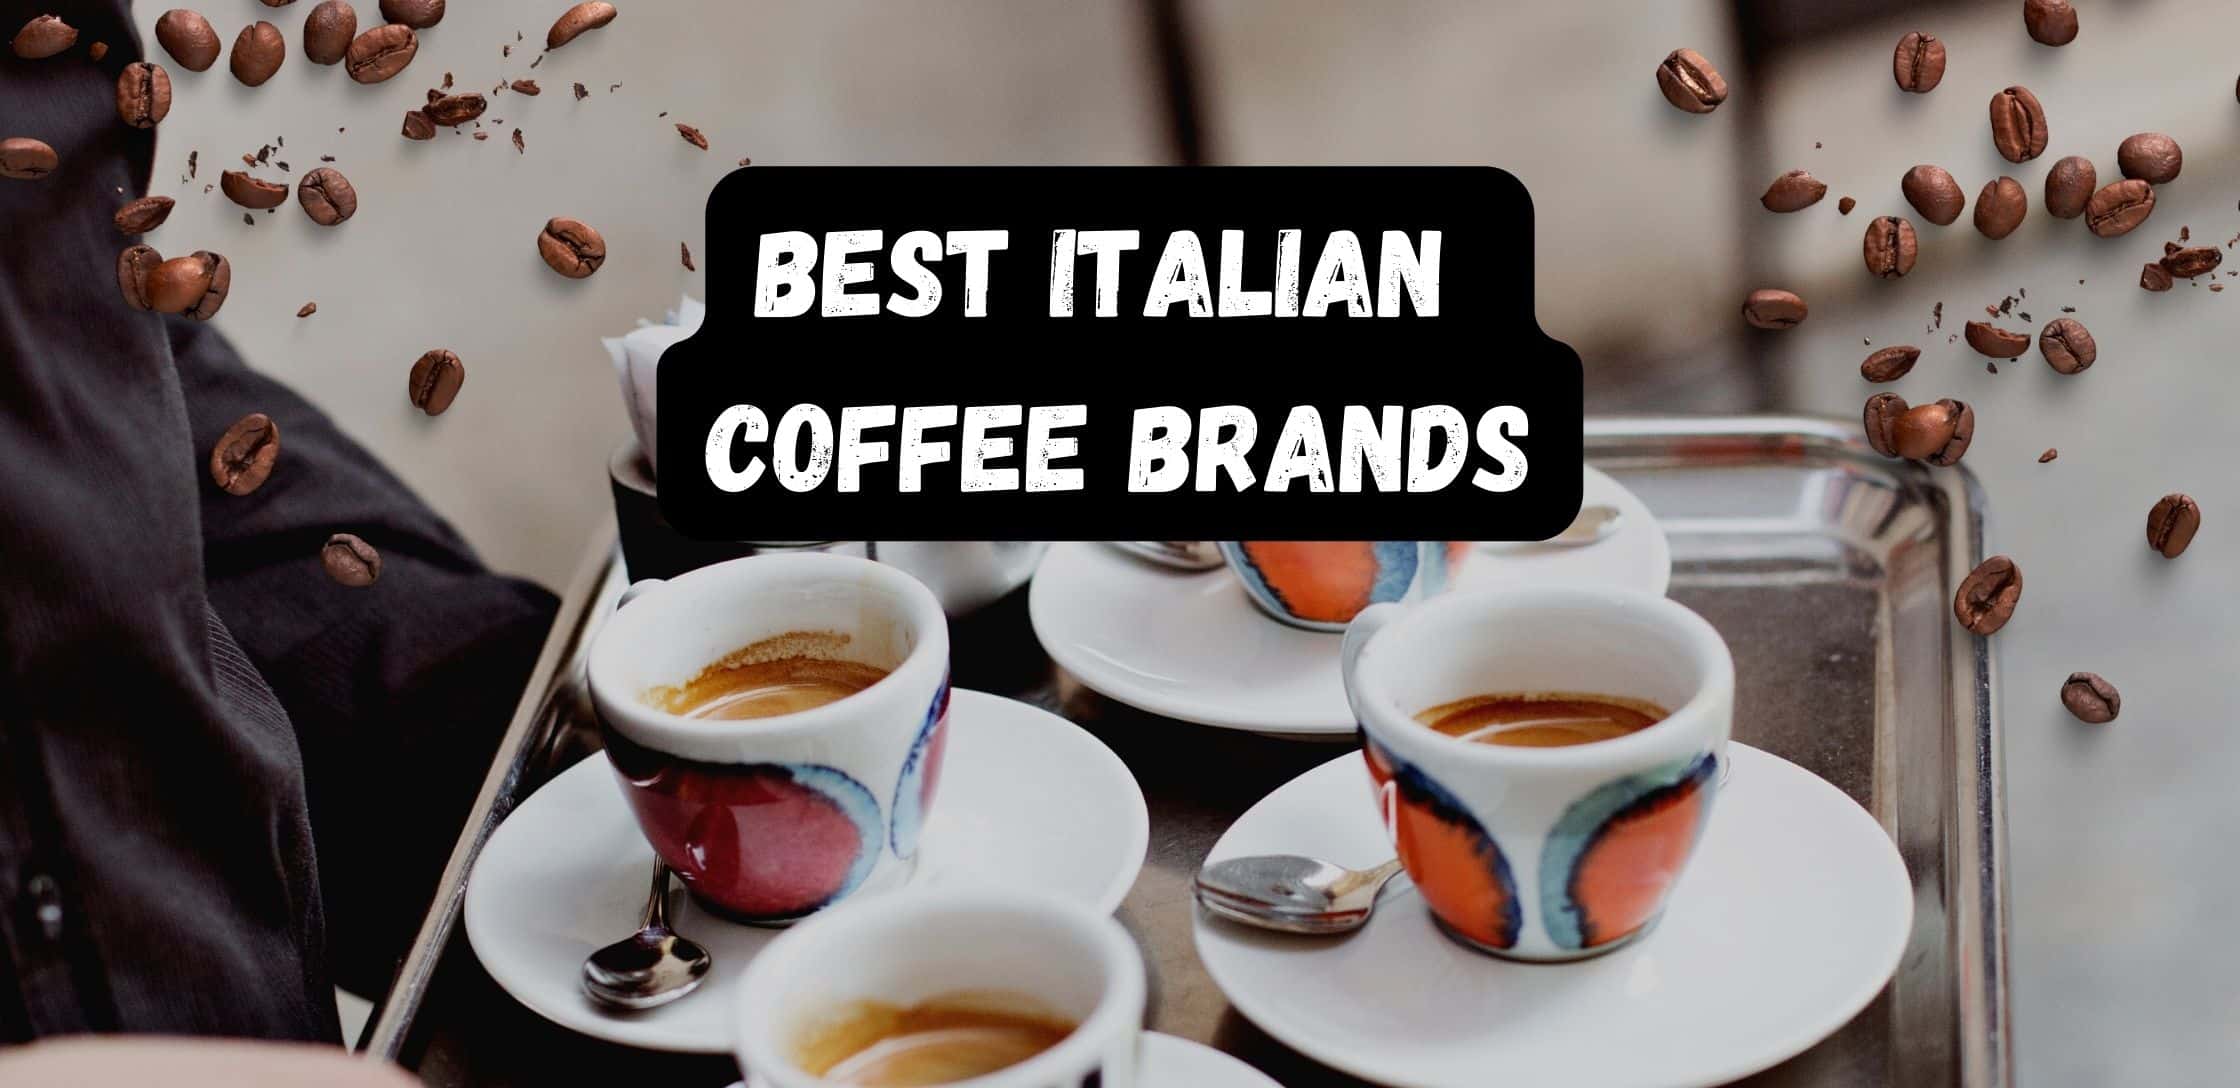 La Bottega Nicastro - Illy coffee is the most recognized Italian coffee  brand, the icon of fine espresso around the world. Illy carries the best  coffee in beans and ground format as